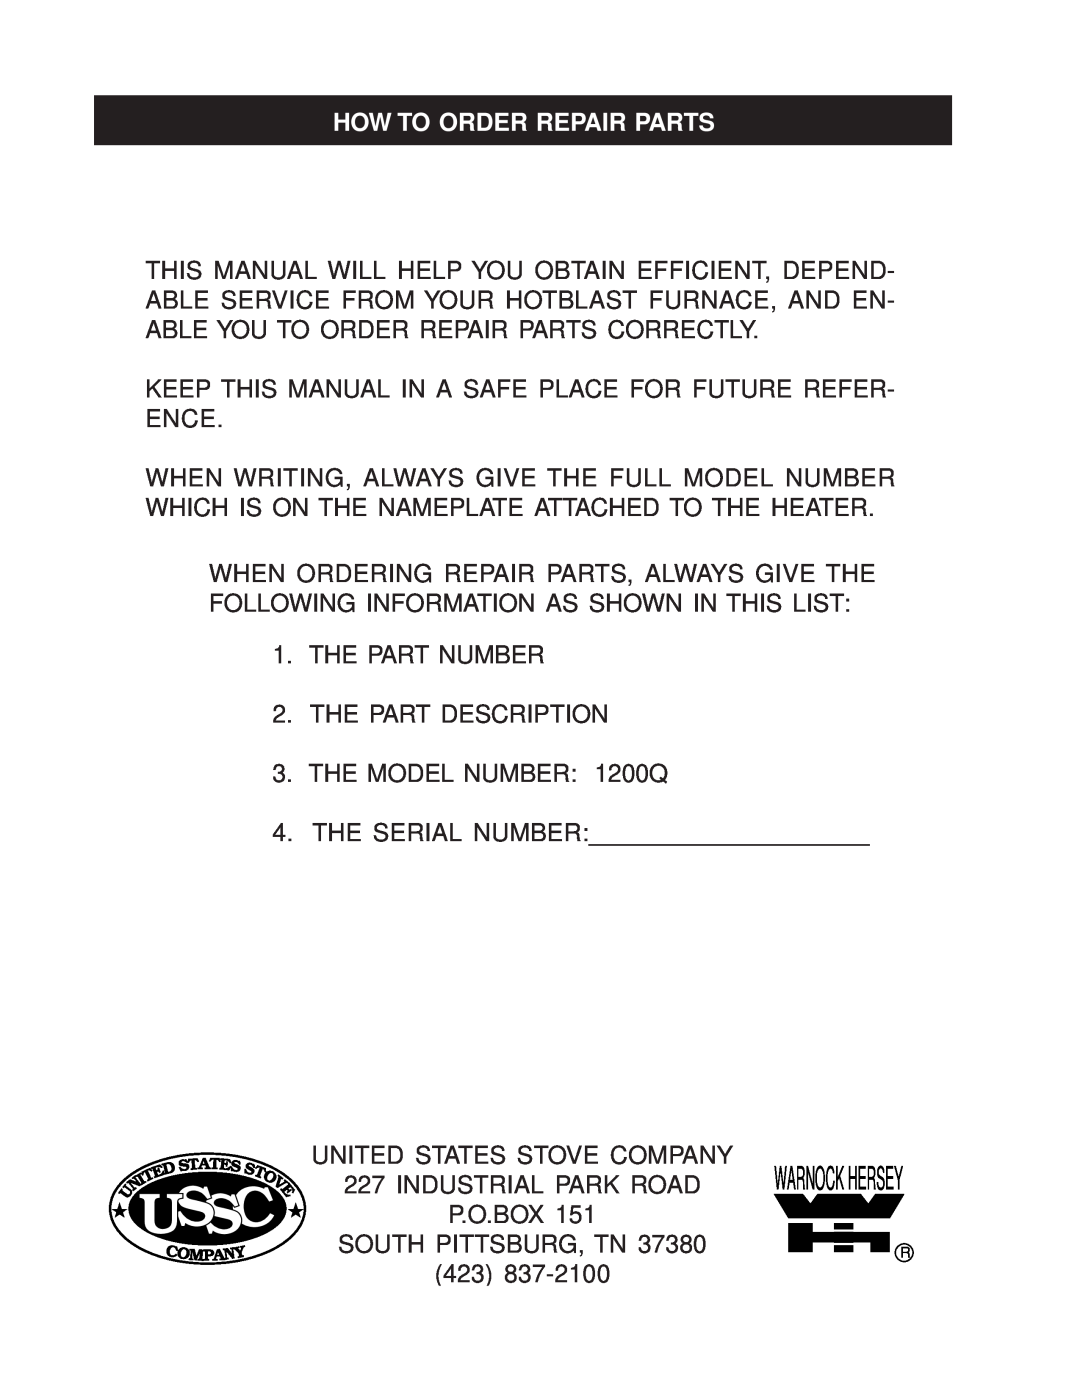 United States Stove 1200Q owner manual How To Order Repair Parts, Ussc 